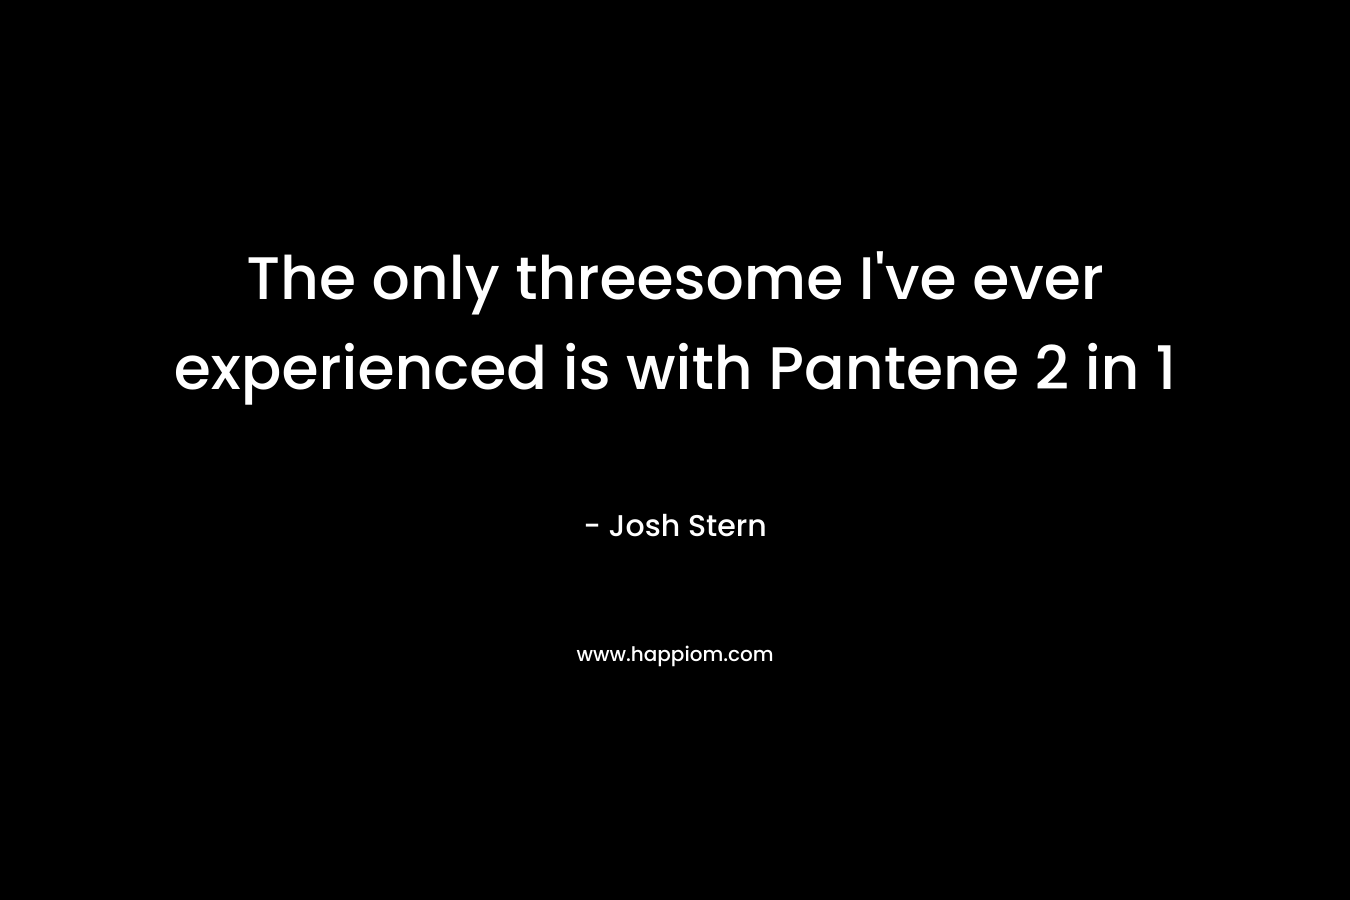 The only threesome I've ever experienced is with Pantene 2 in 1